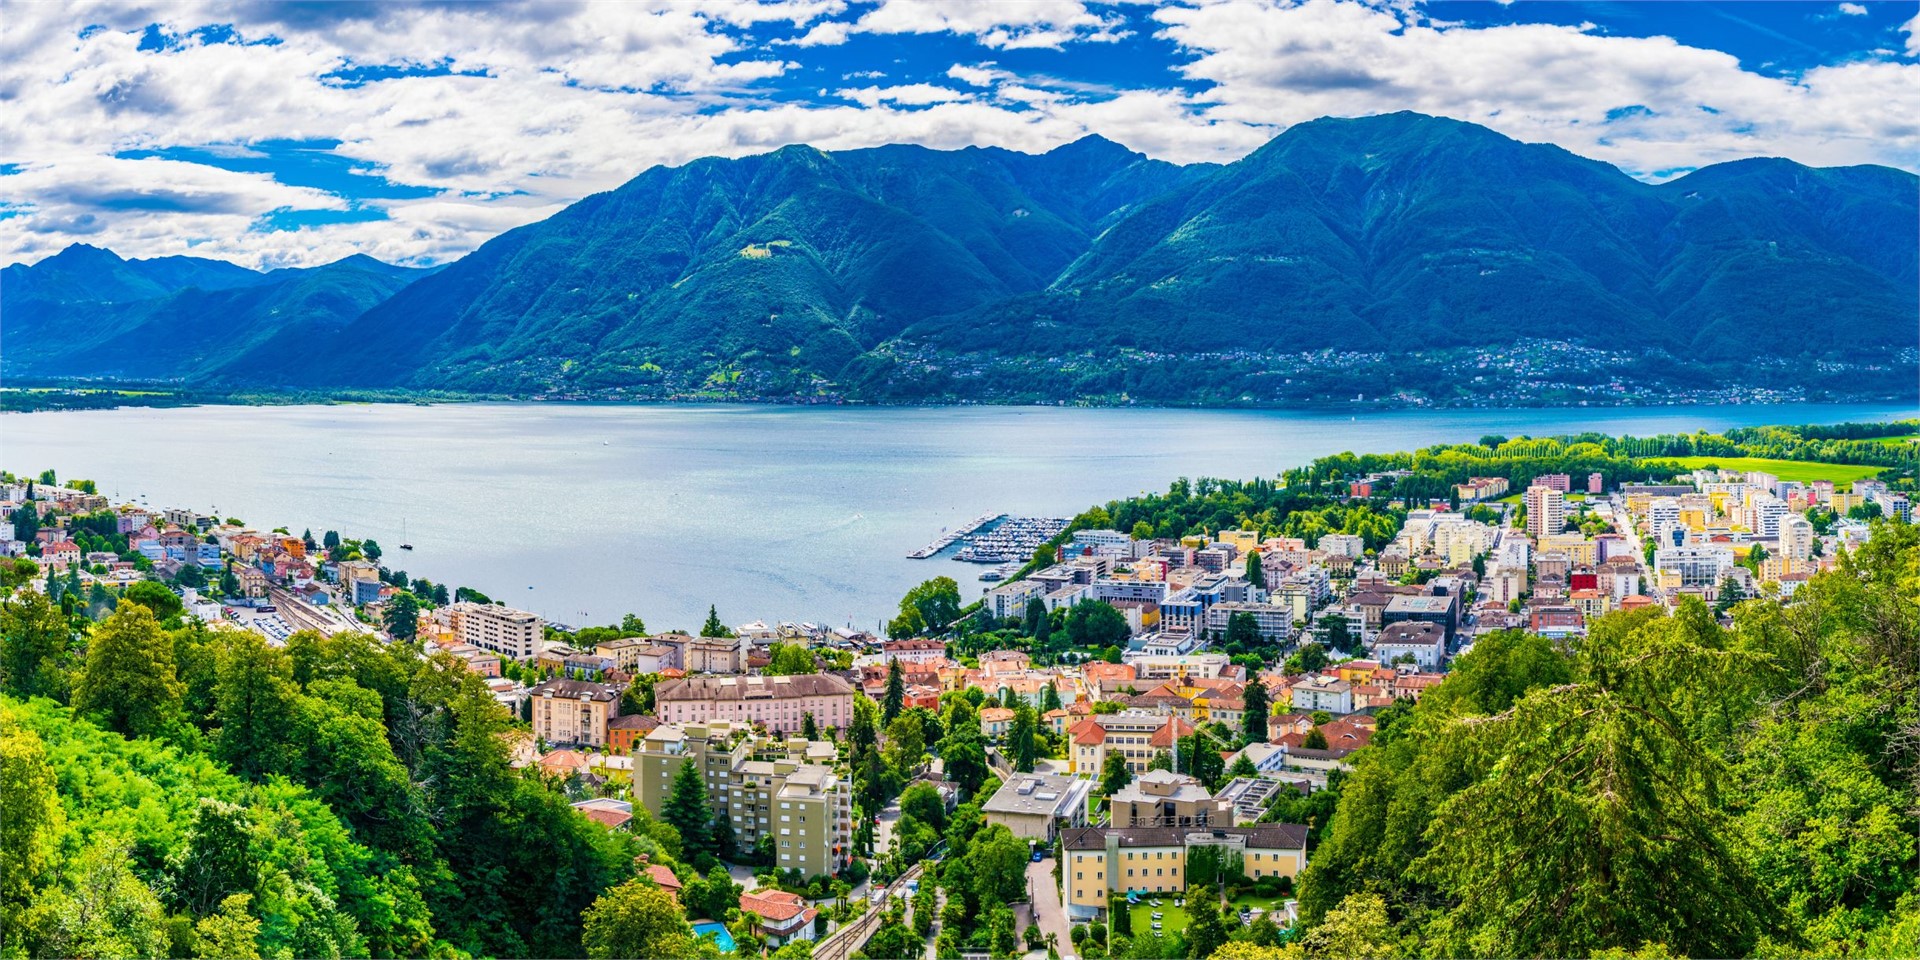 Hotels and accommodation in Locarno, Switzerland
